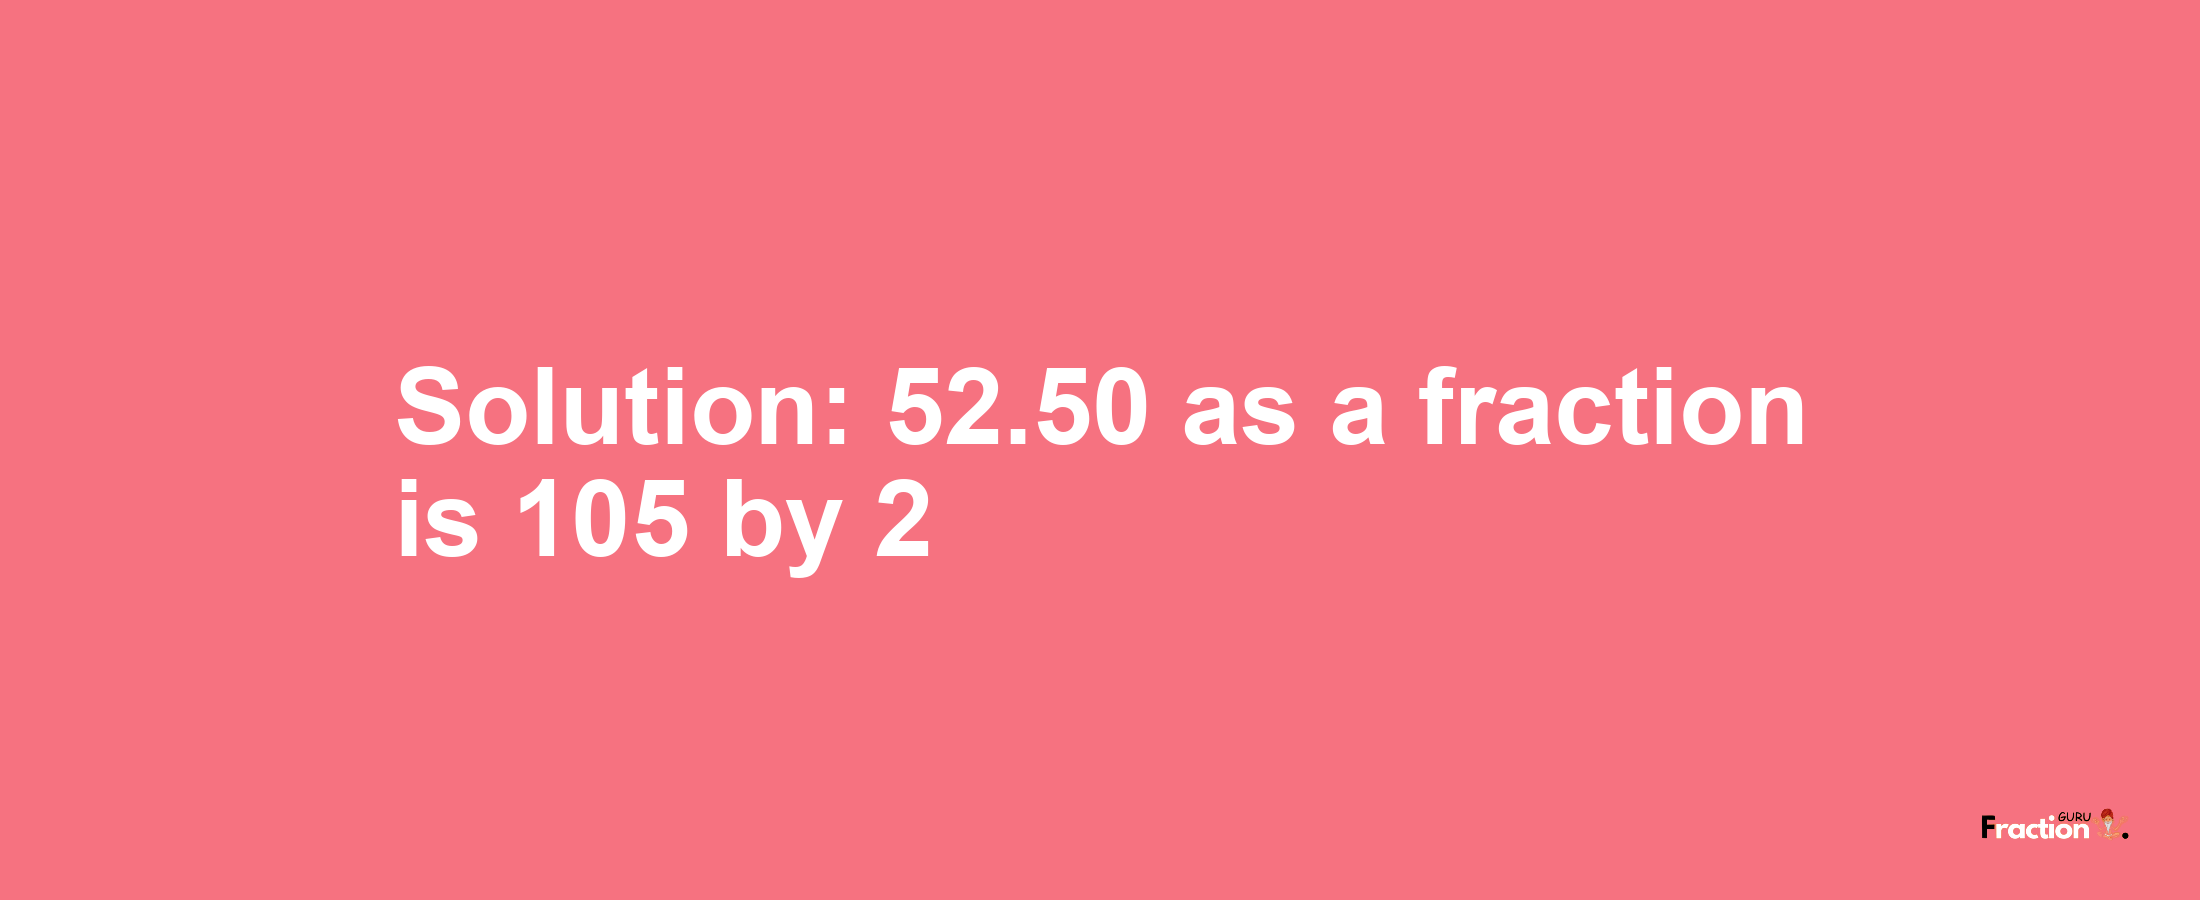 Solution:52.50 as a fraction is 105/2